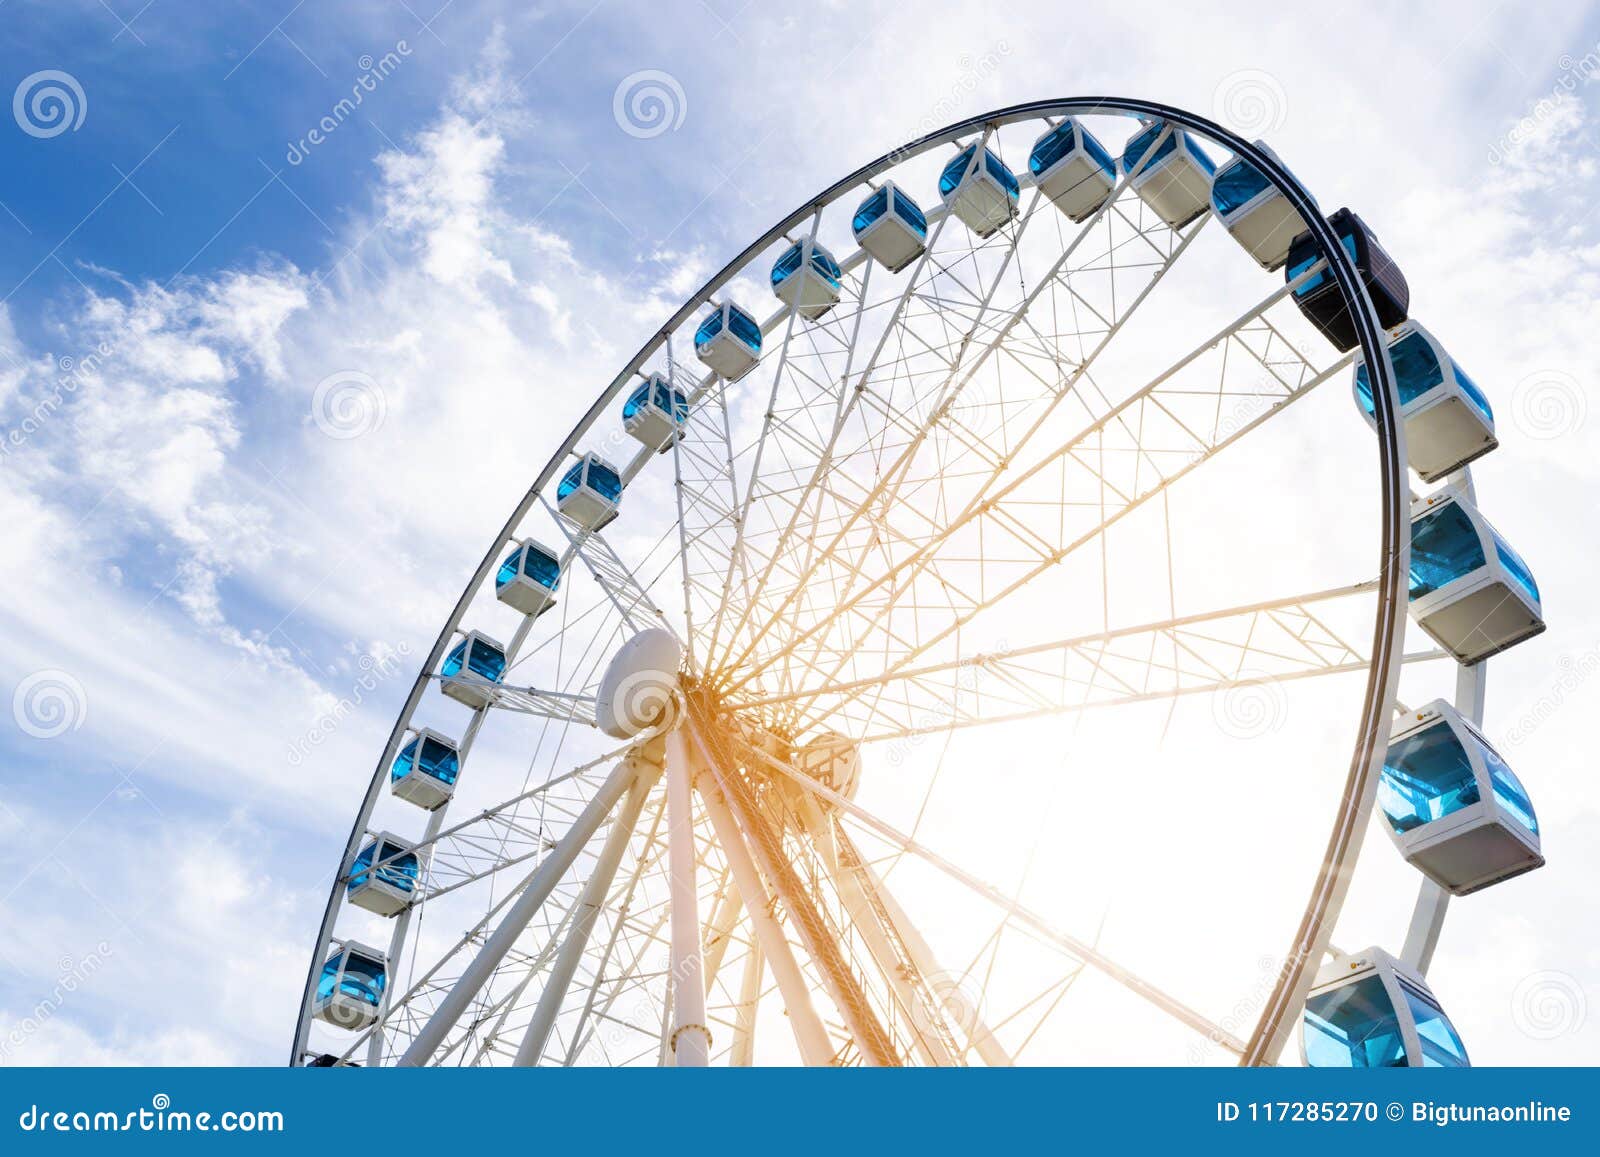 Low Angle View Of A Ferris Wheel In An Amusement Park With A Blue